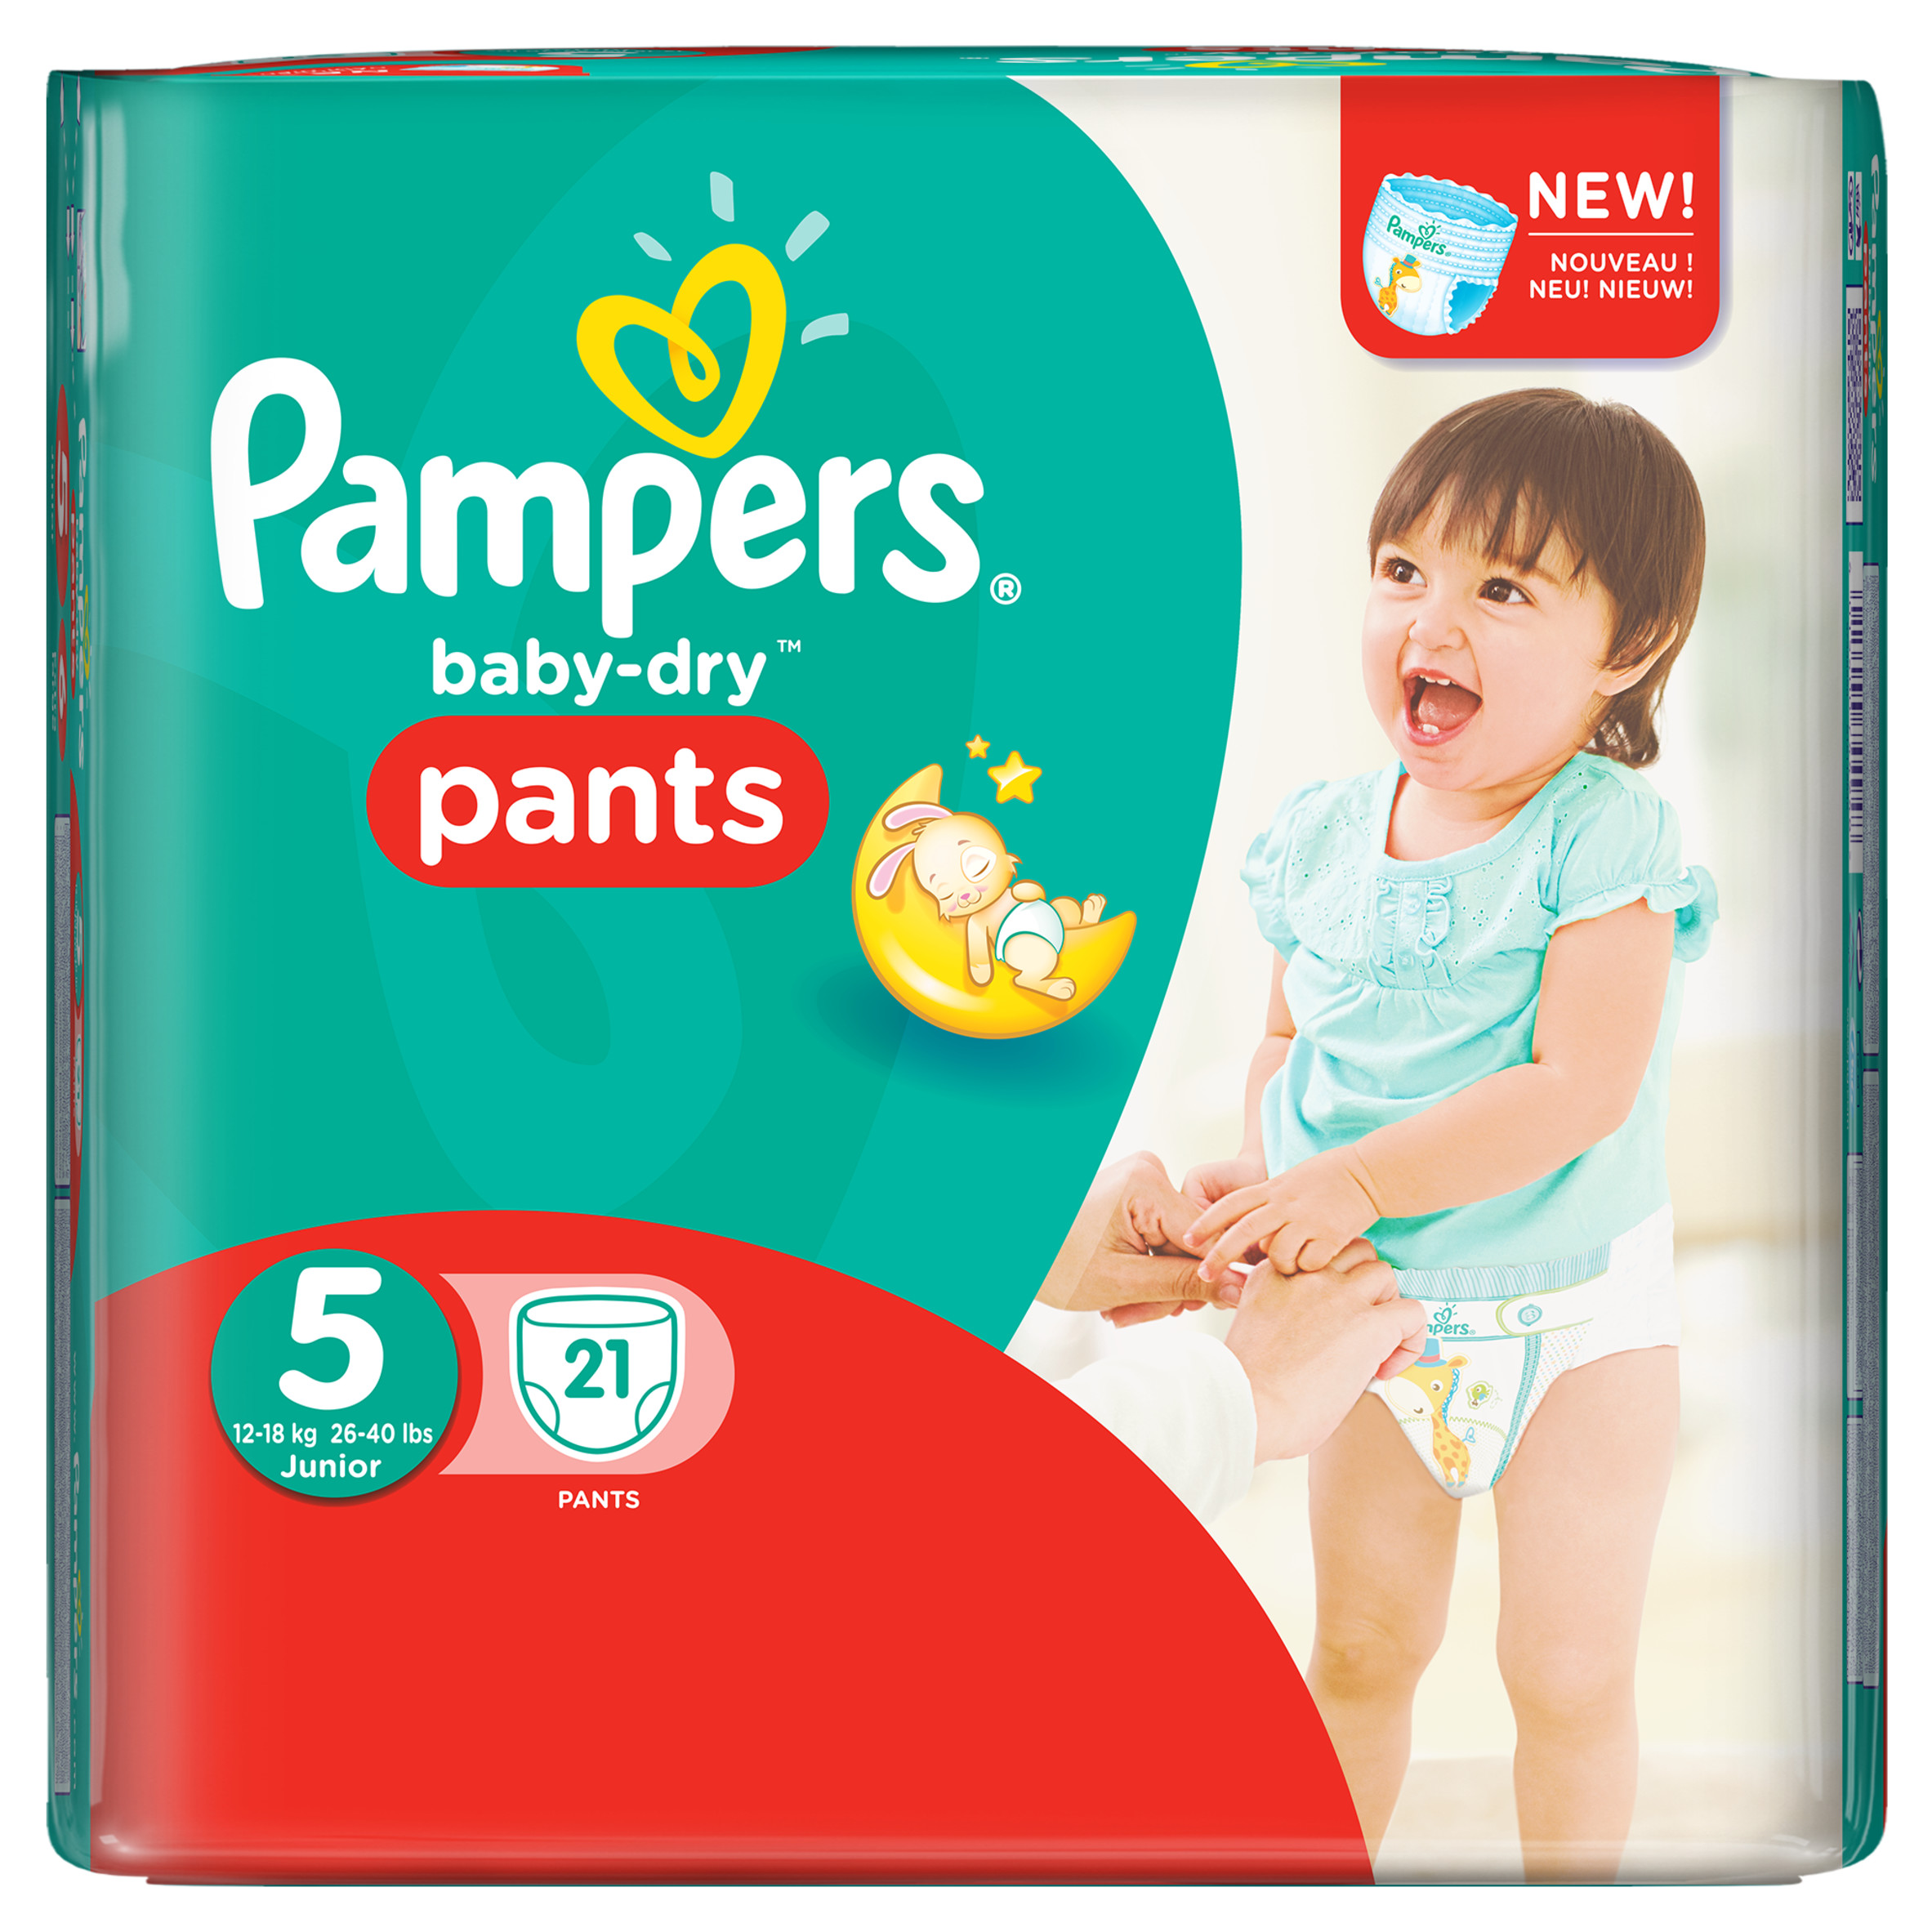 Pampers Baby Dry Pants Monthly Mega Box, Large (128 Count) – Hayumsidaba